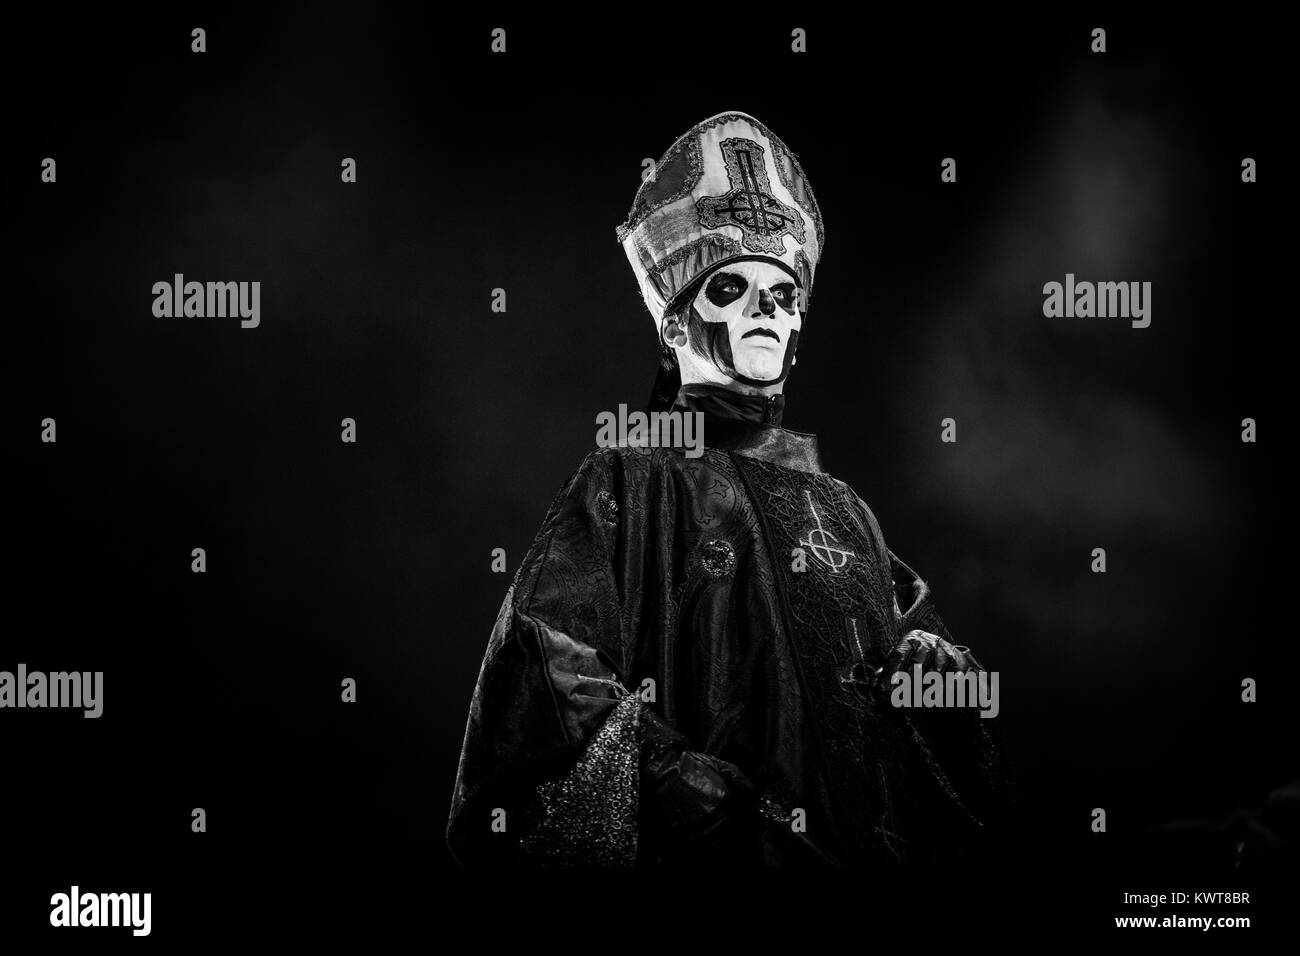 The Swedish doom metal band Ghost performs a live concert at the Danish heavy metal festival Copenhell 2015 in Copenhagen. Here the band’s vocalist Papa Emeritus III is pictured live on stage wearing skull make-up and a Roman Catholic pope coat. Denmark, 21/06 2015. Stock Photo